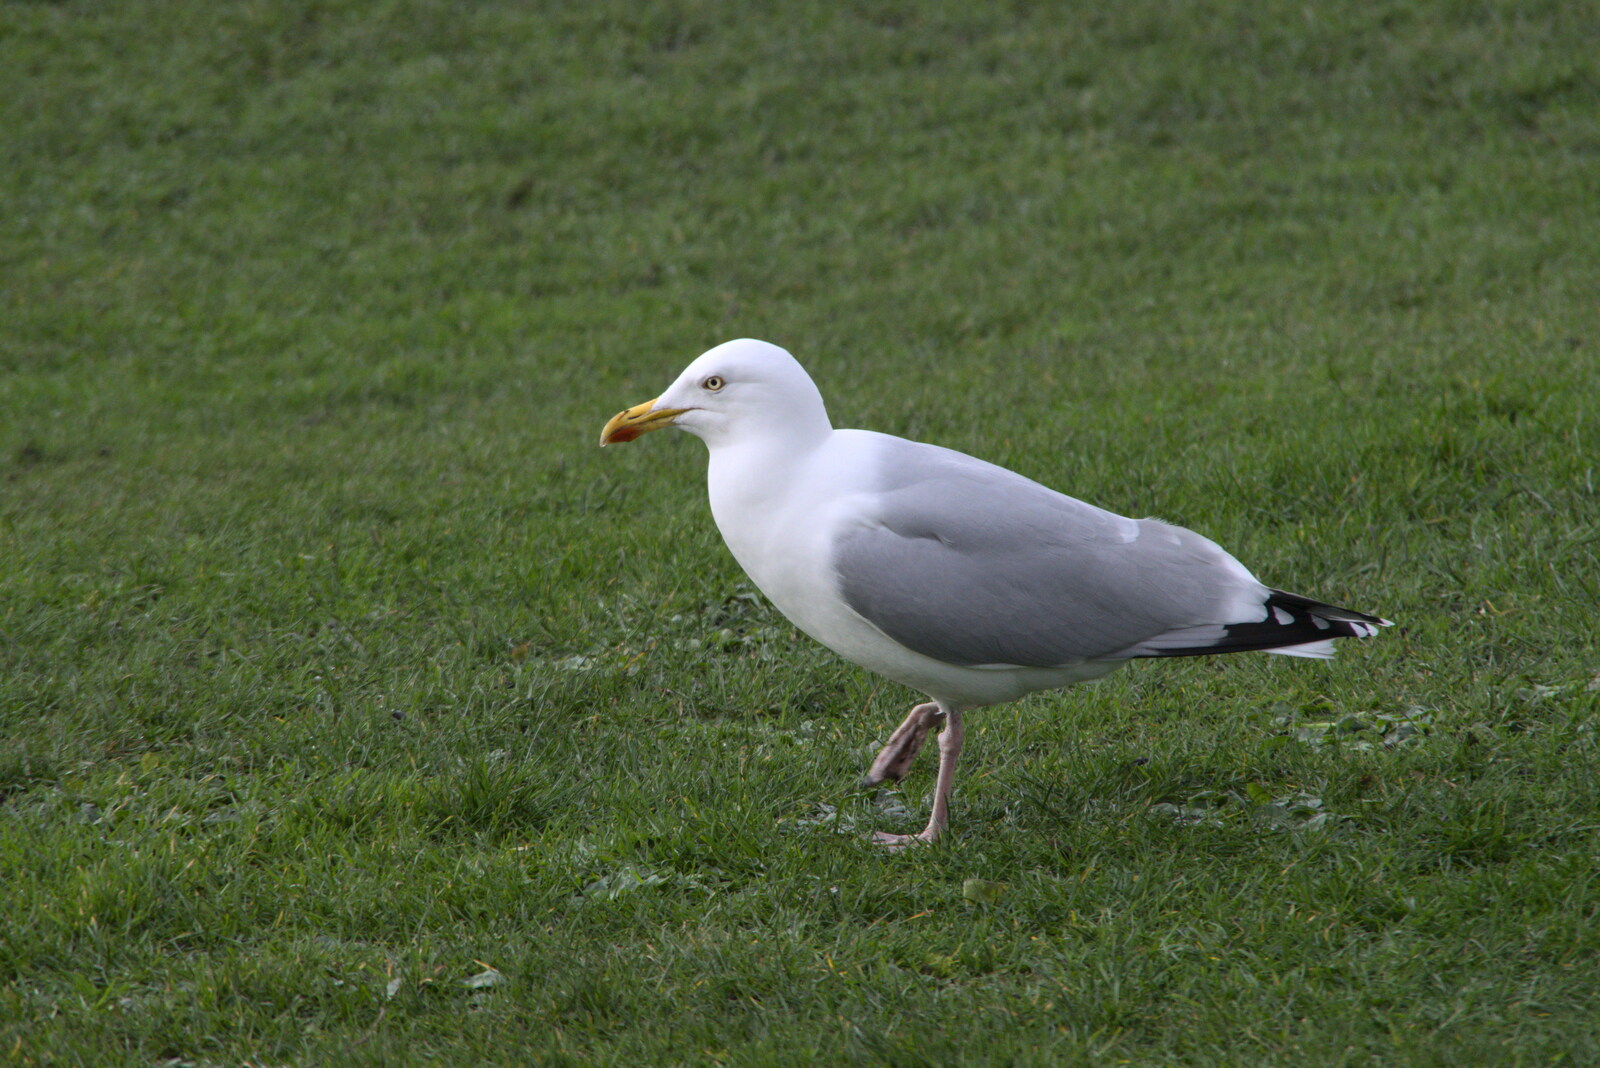 The Dead Zoo, Dublin, Ireland - 17th February 2023: A herring gull does a dance for worms